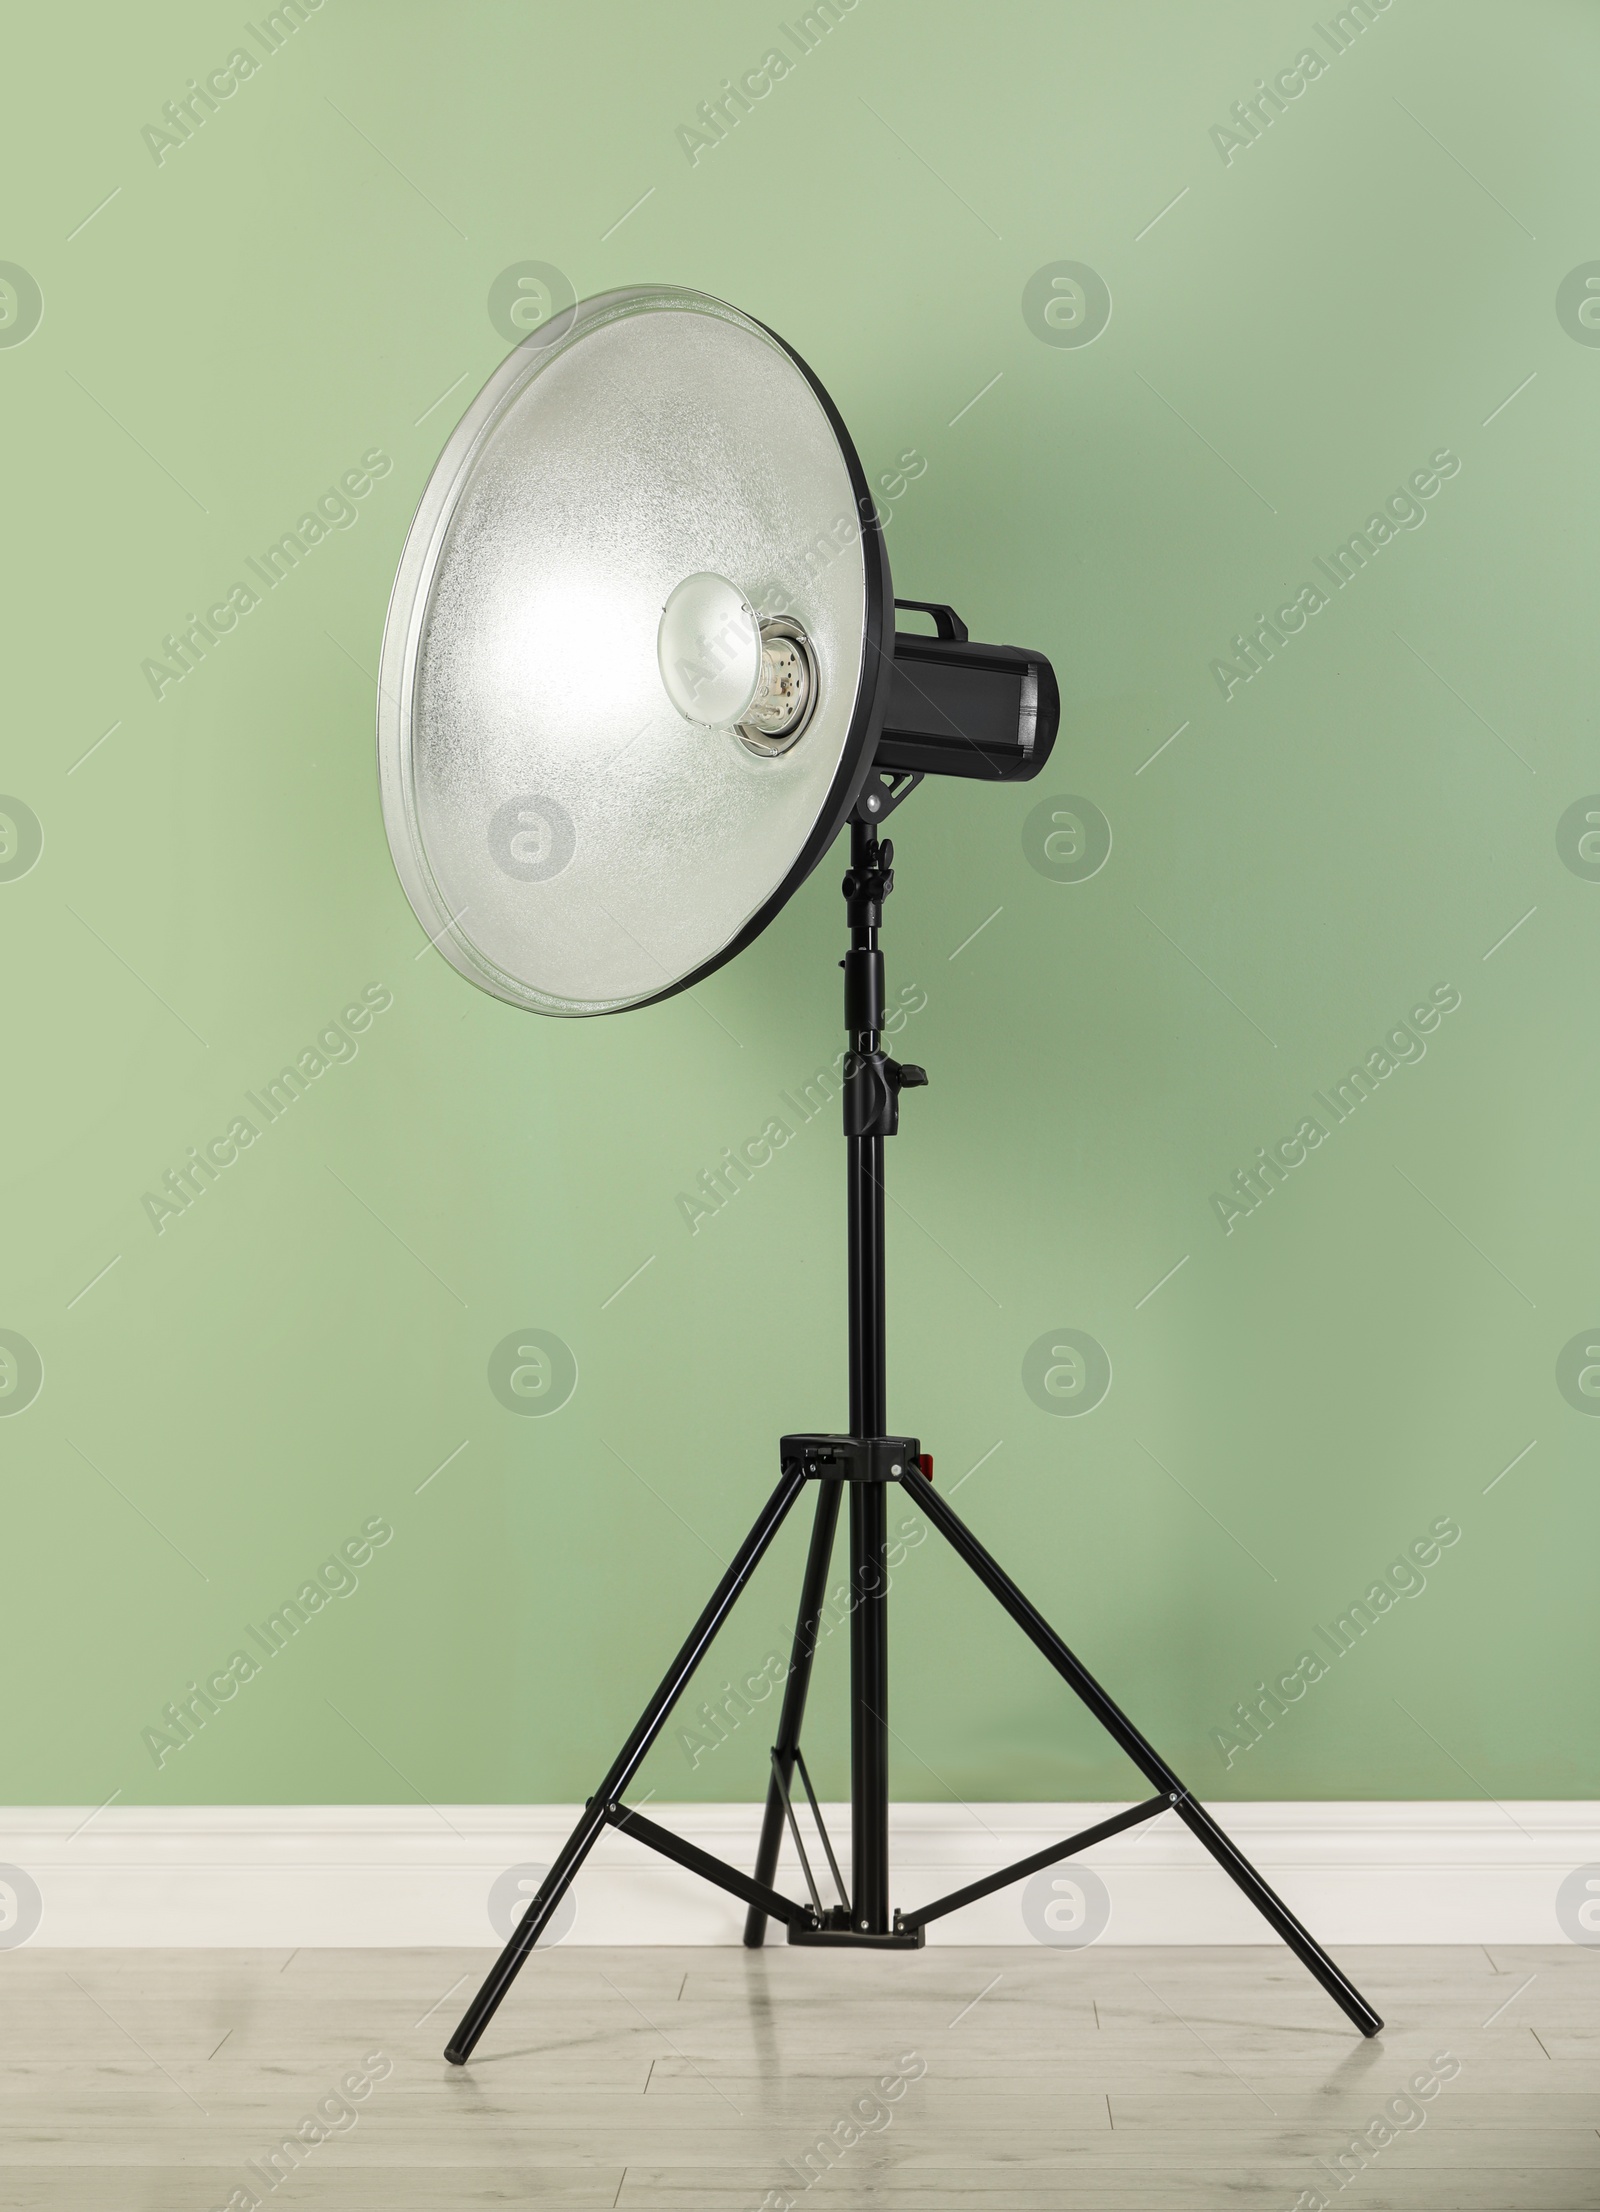 Photo of Professional beauty dish reflector on tripod near pale green wall in room. Photography equipment